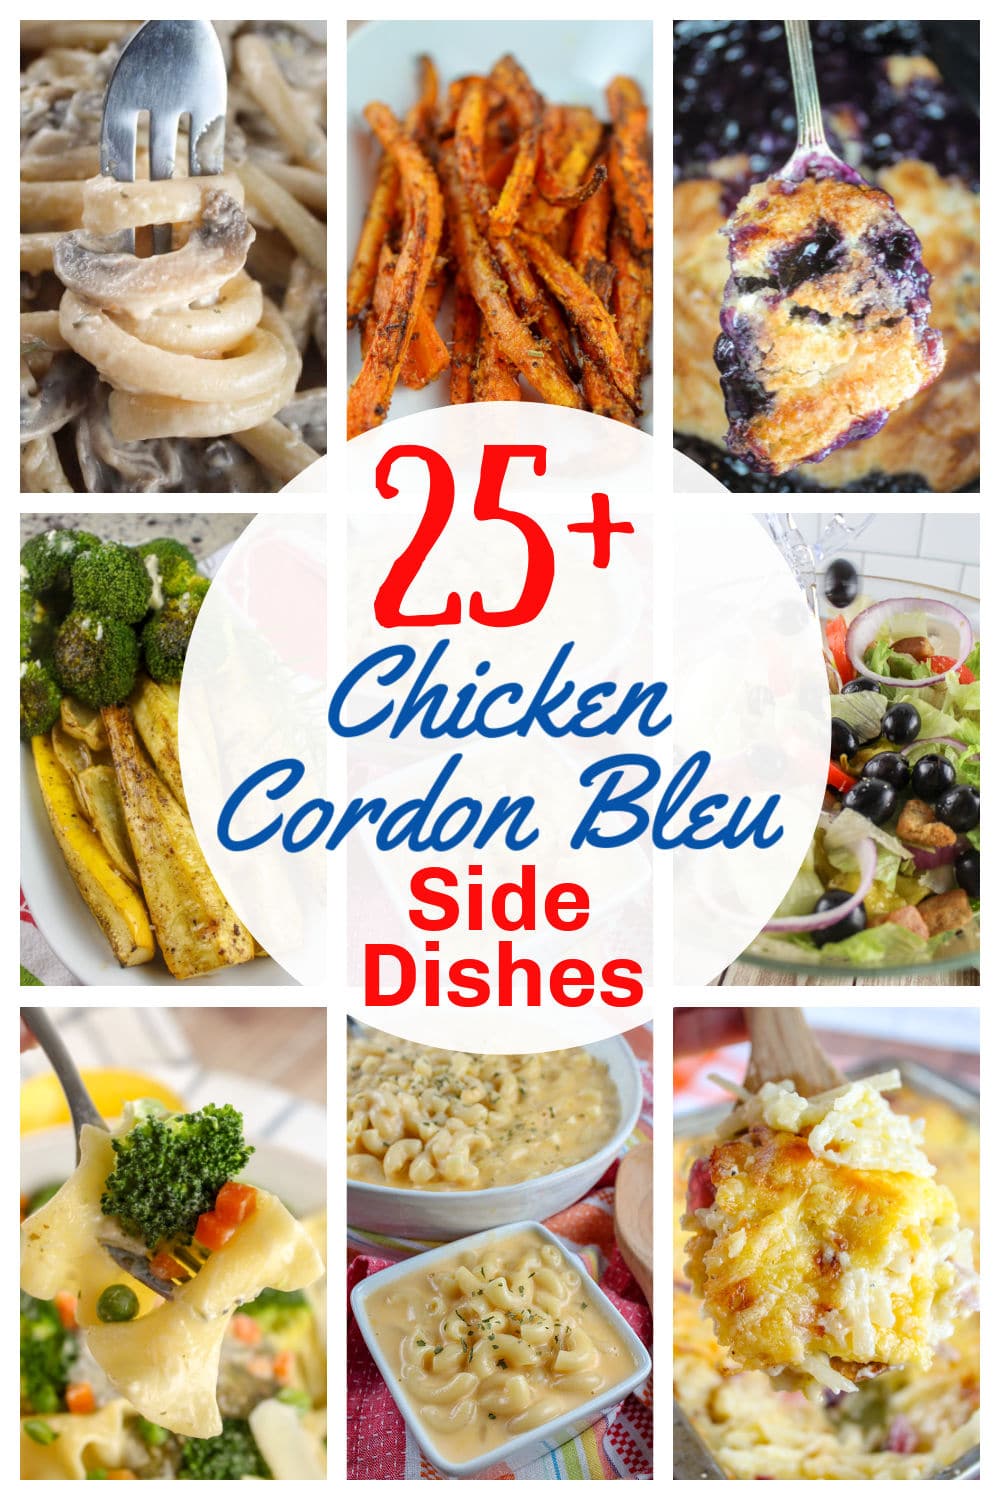 What goes best with Chicken Cordon Bleu? There's chicken, ham and cheese - but where do you go from there? I've got 25+ side dish recipes that are a perfect fit for Chicken Cordon Bleu including salads, carbs and veggies!  via @foodhussy